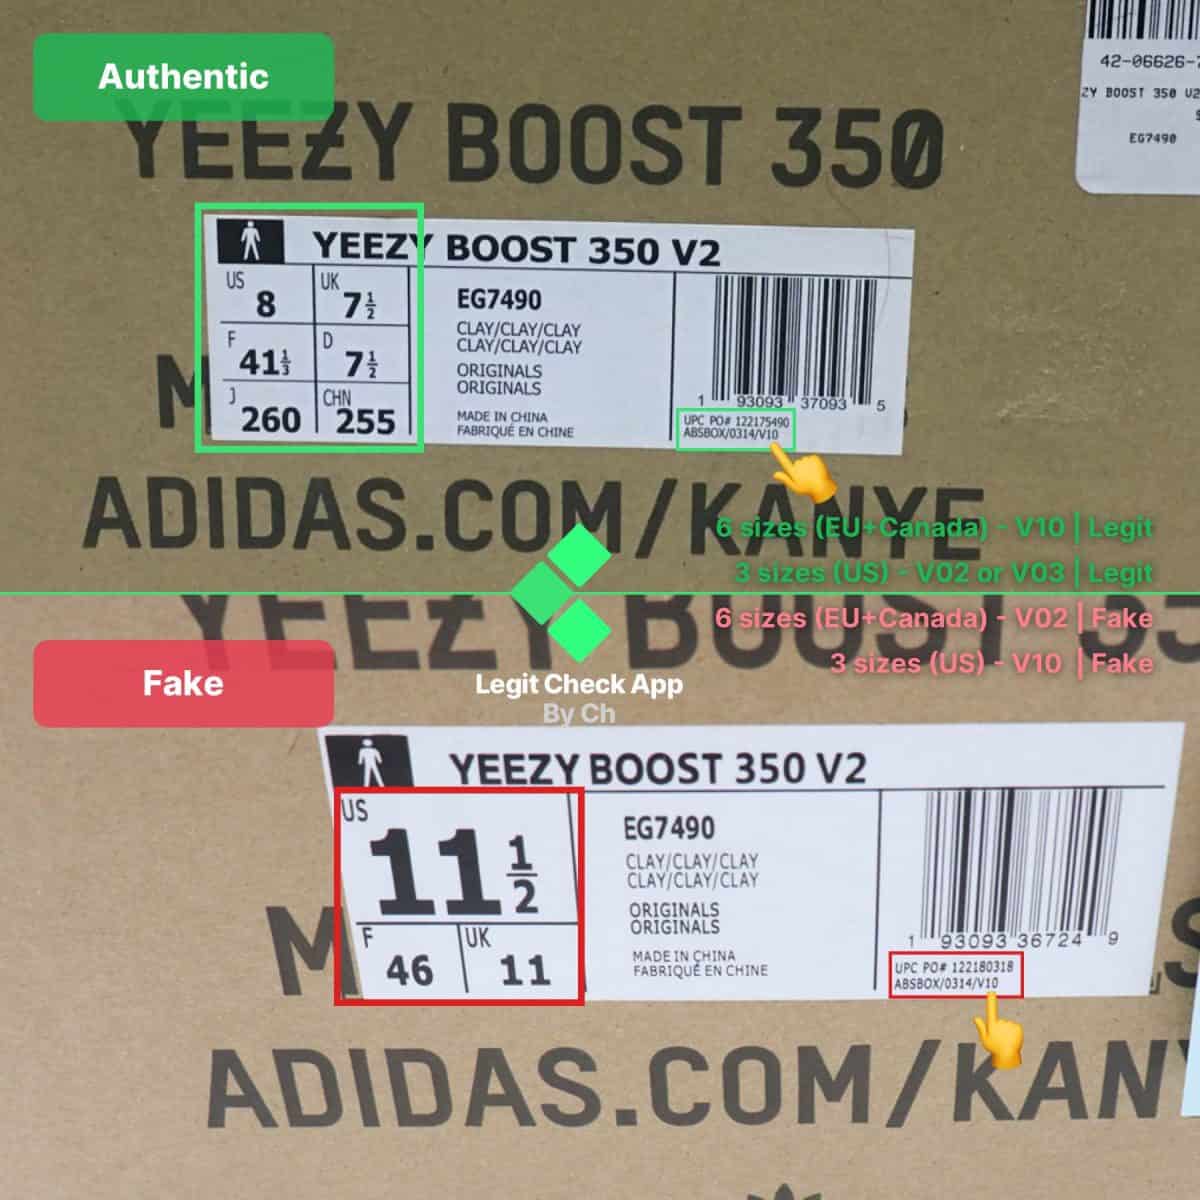 yeezy boost 380 mist fake vs real box labels